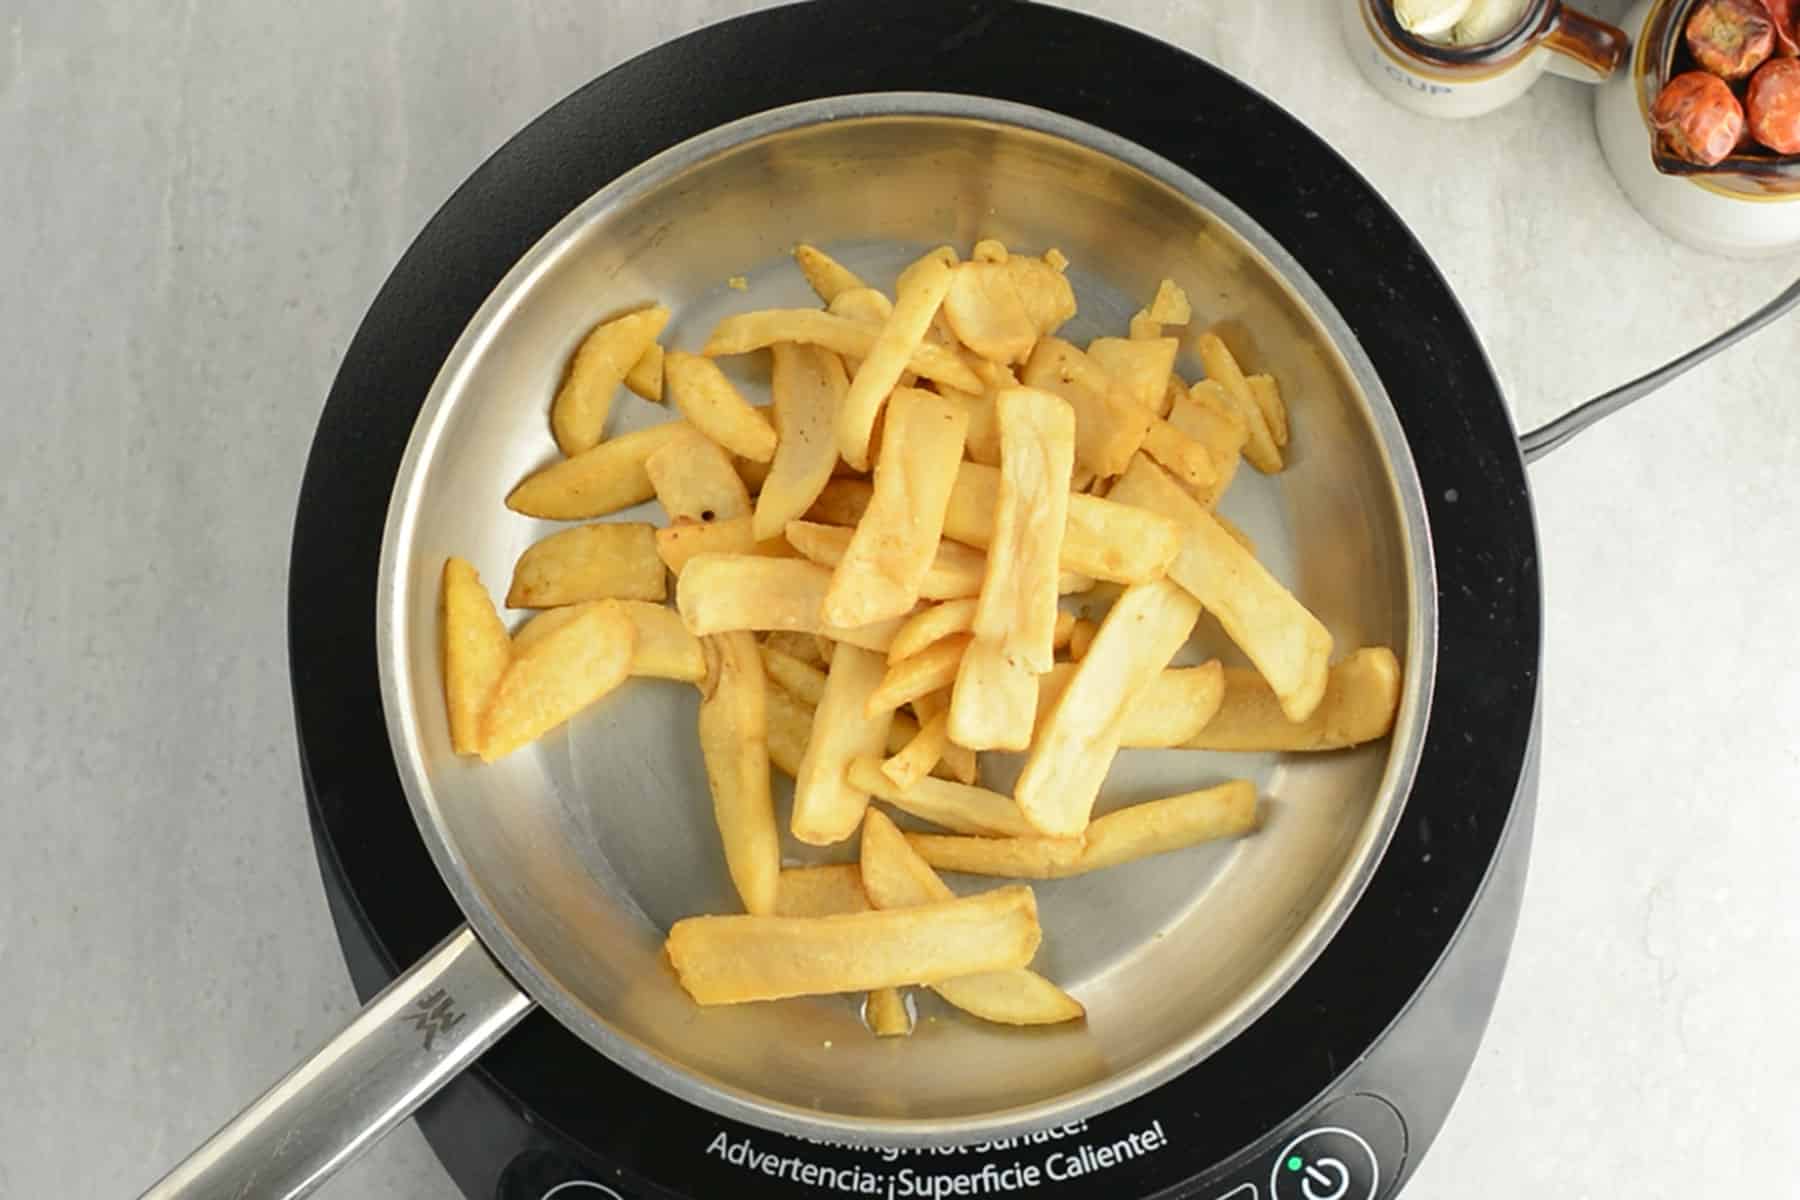 fries placed in the pan for making chinese french fries